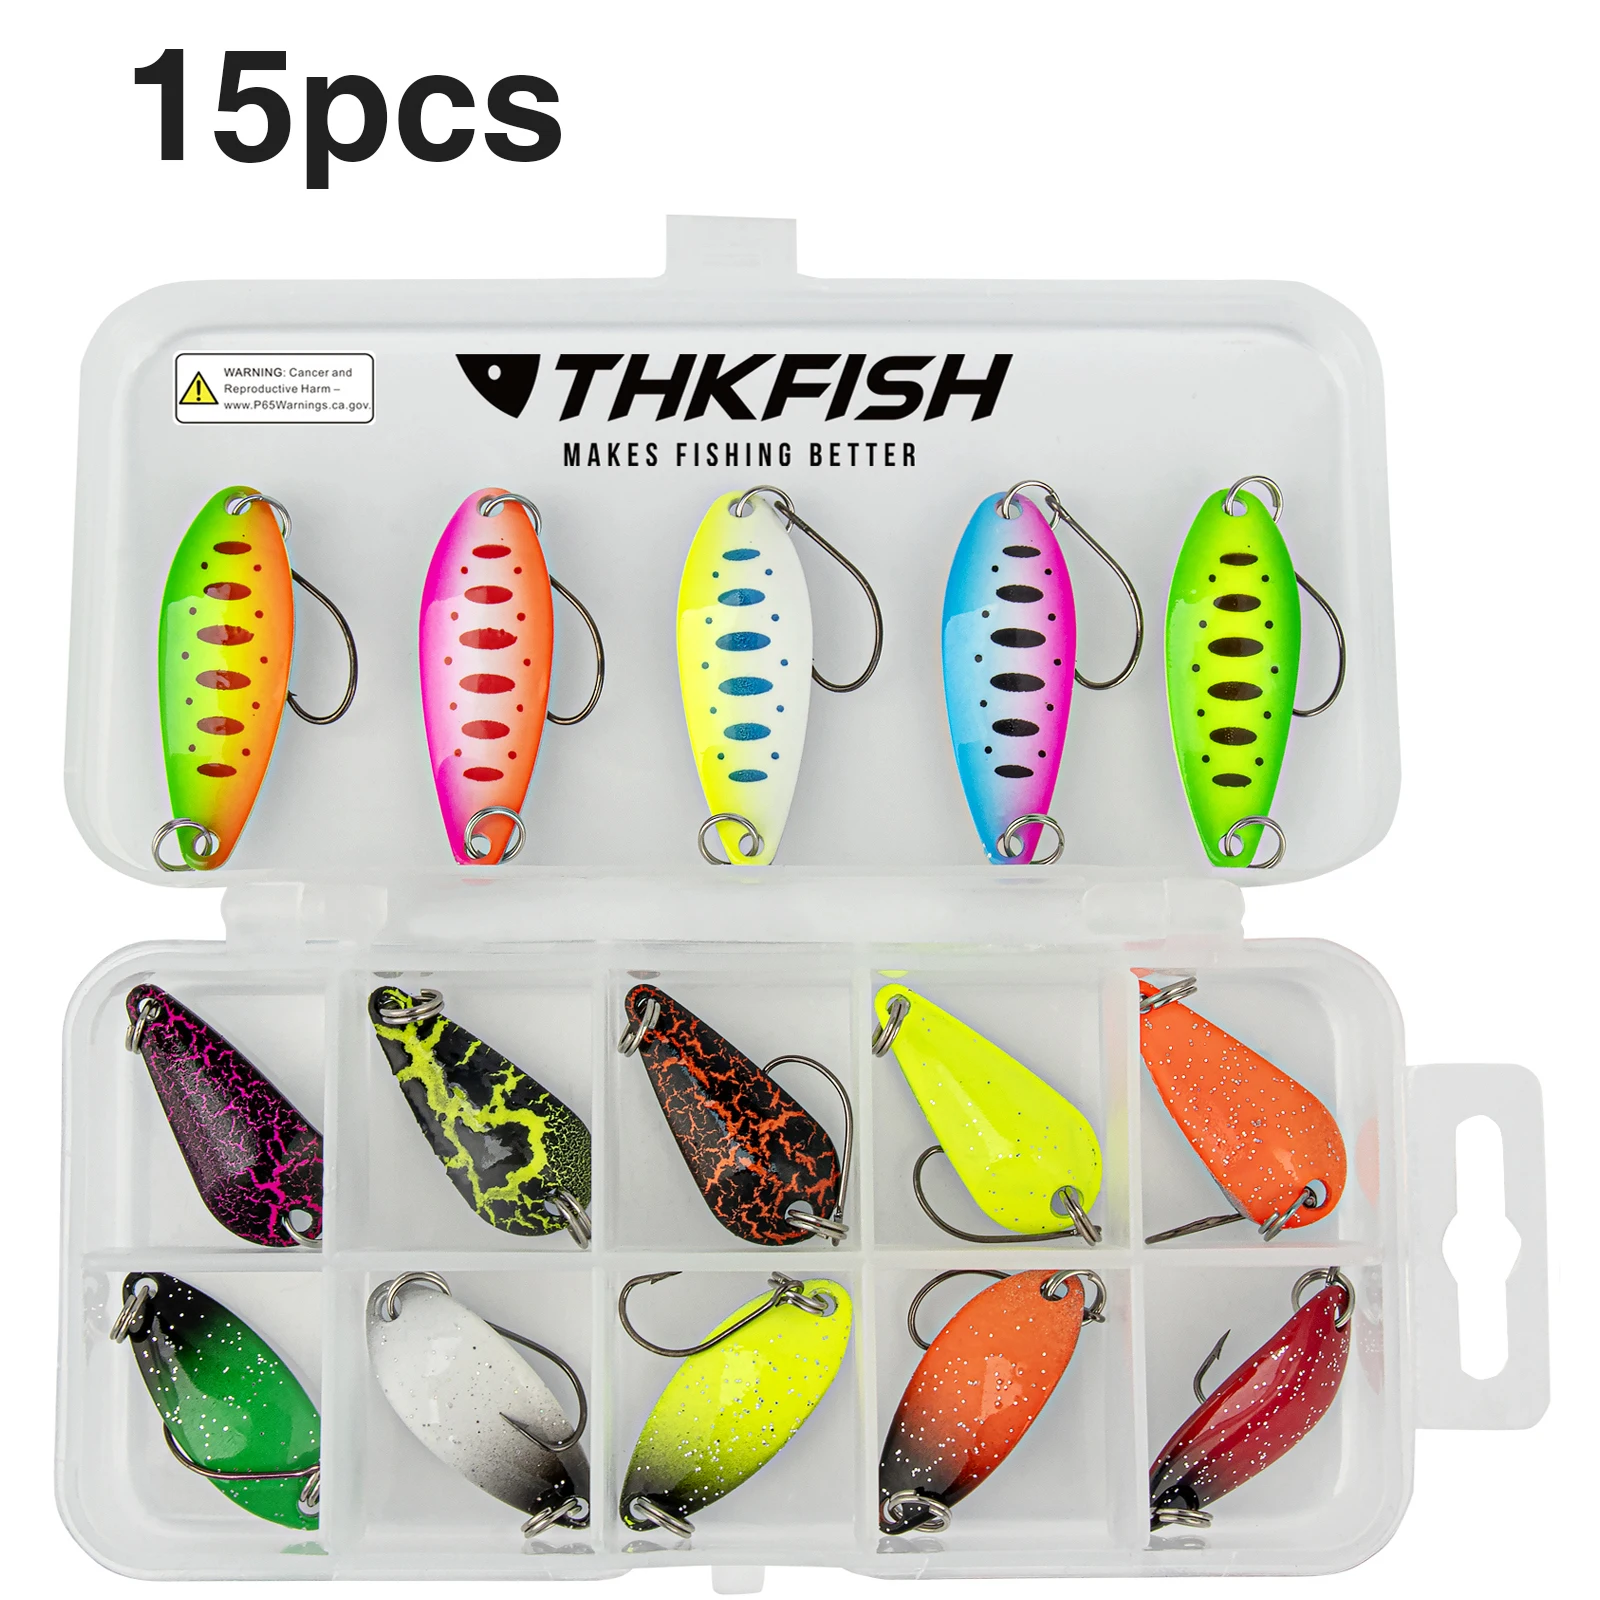 Thkfish 15pcs/box Trout Fishing Spoons Set Hard Trout Baits Single Hook Trout  Lures Metal Fishing Lures For Char Perch - Fishing Lures - AliExpress